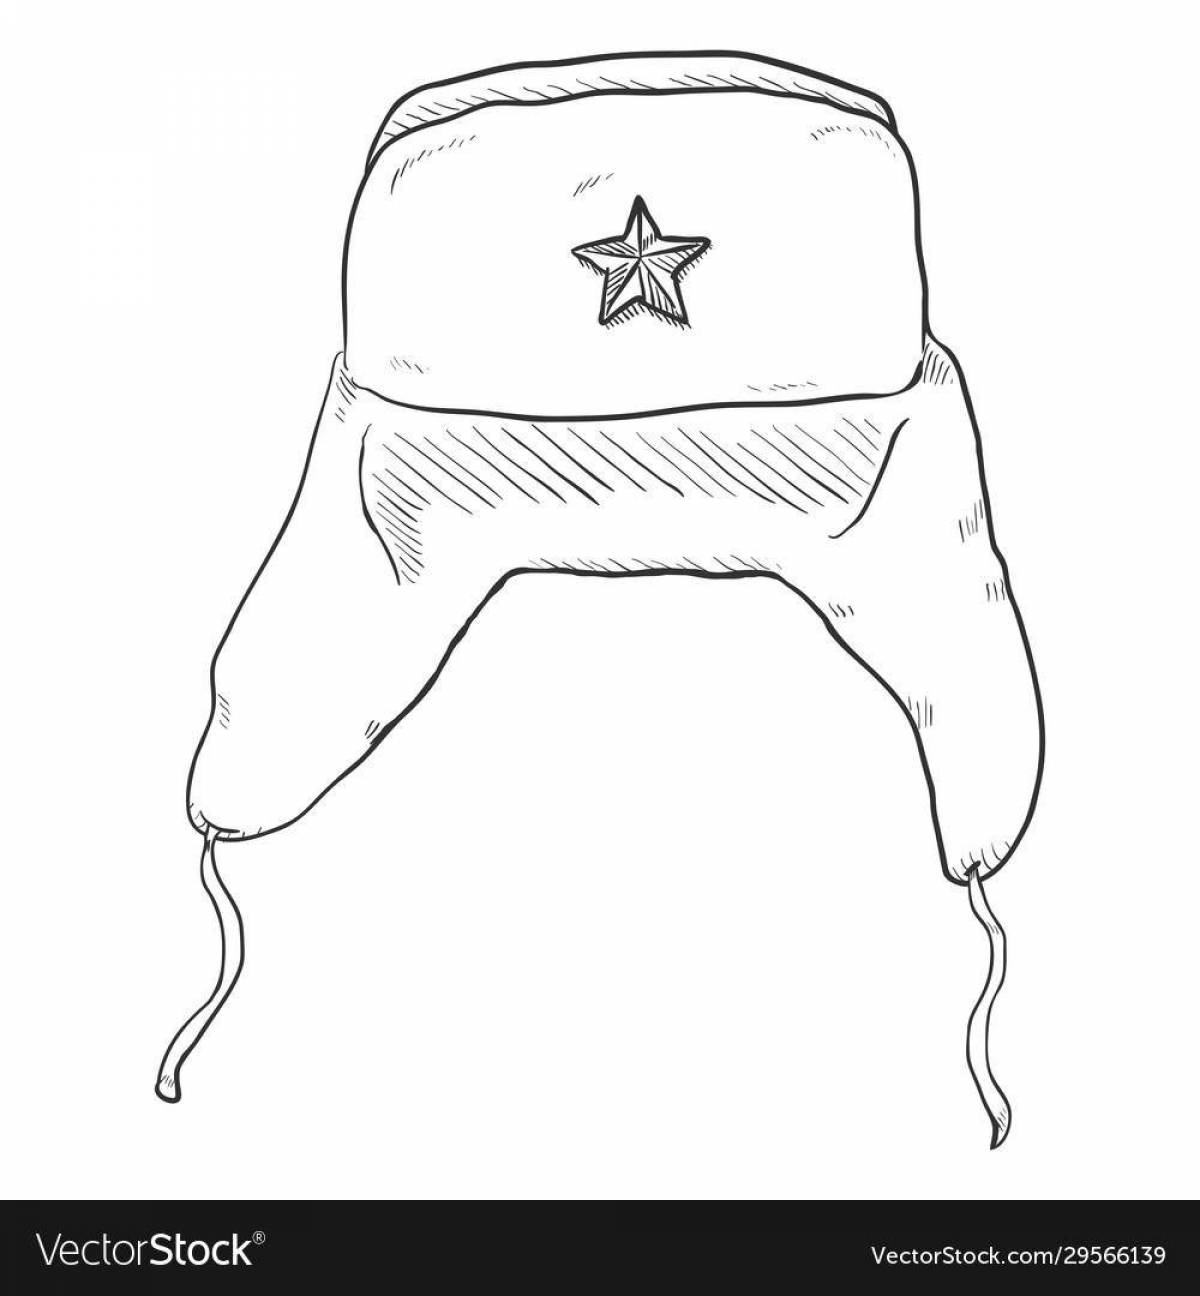 Amazing military helmet coloring book for kids